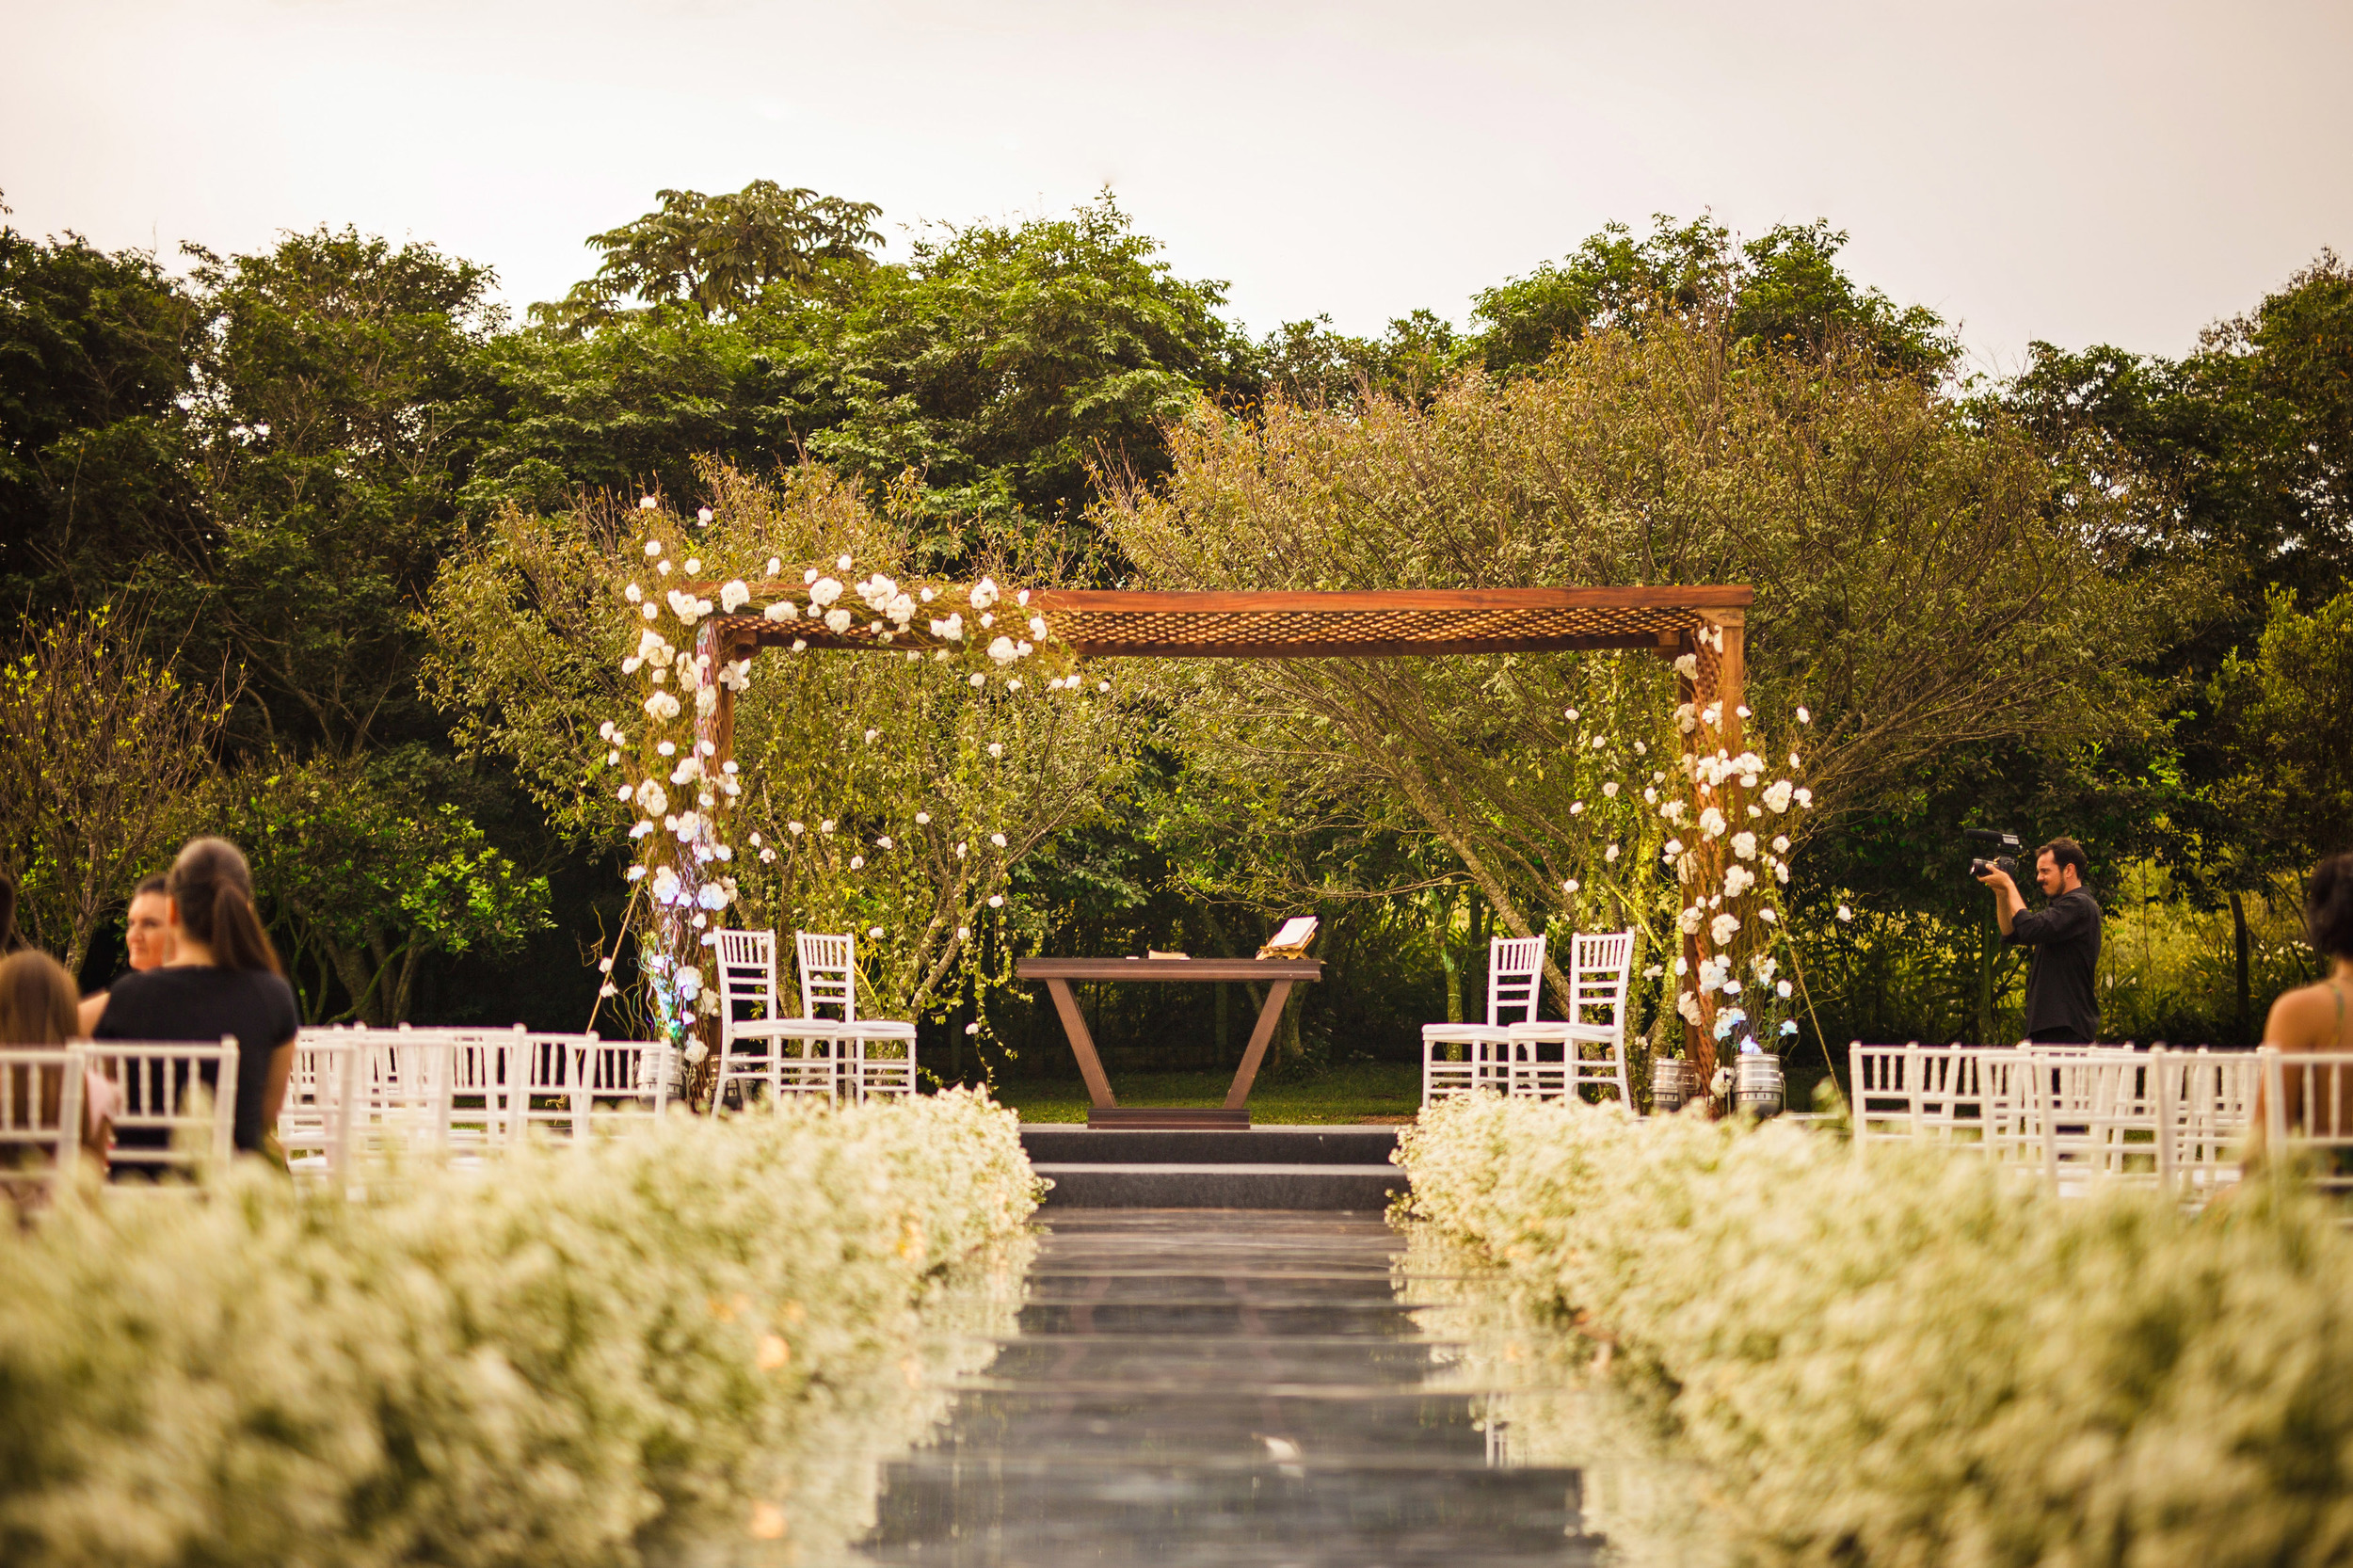  The beautiful wedding alley 